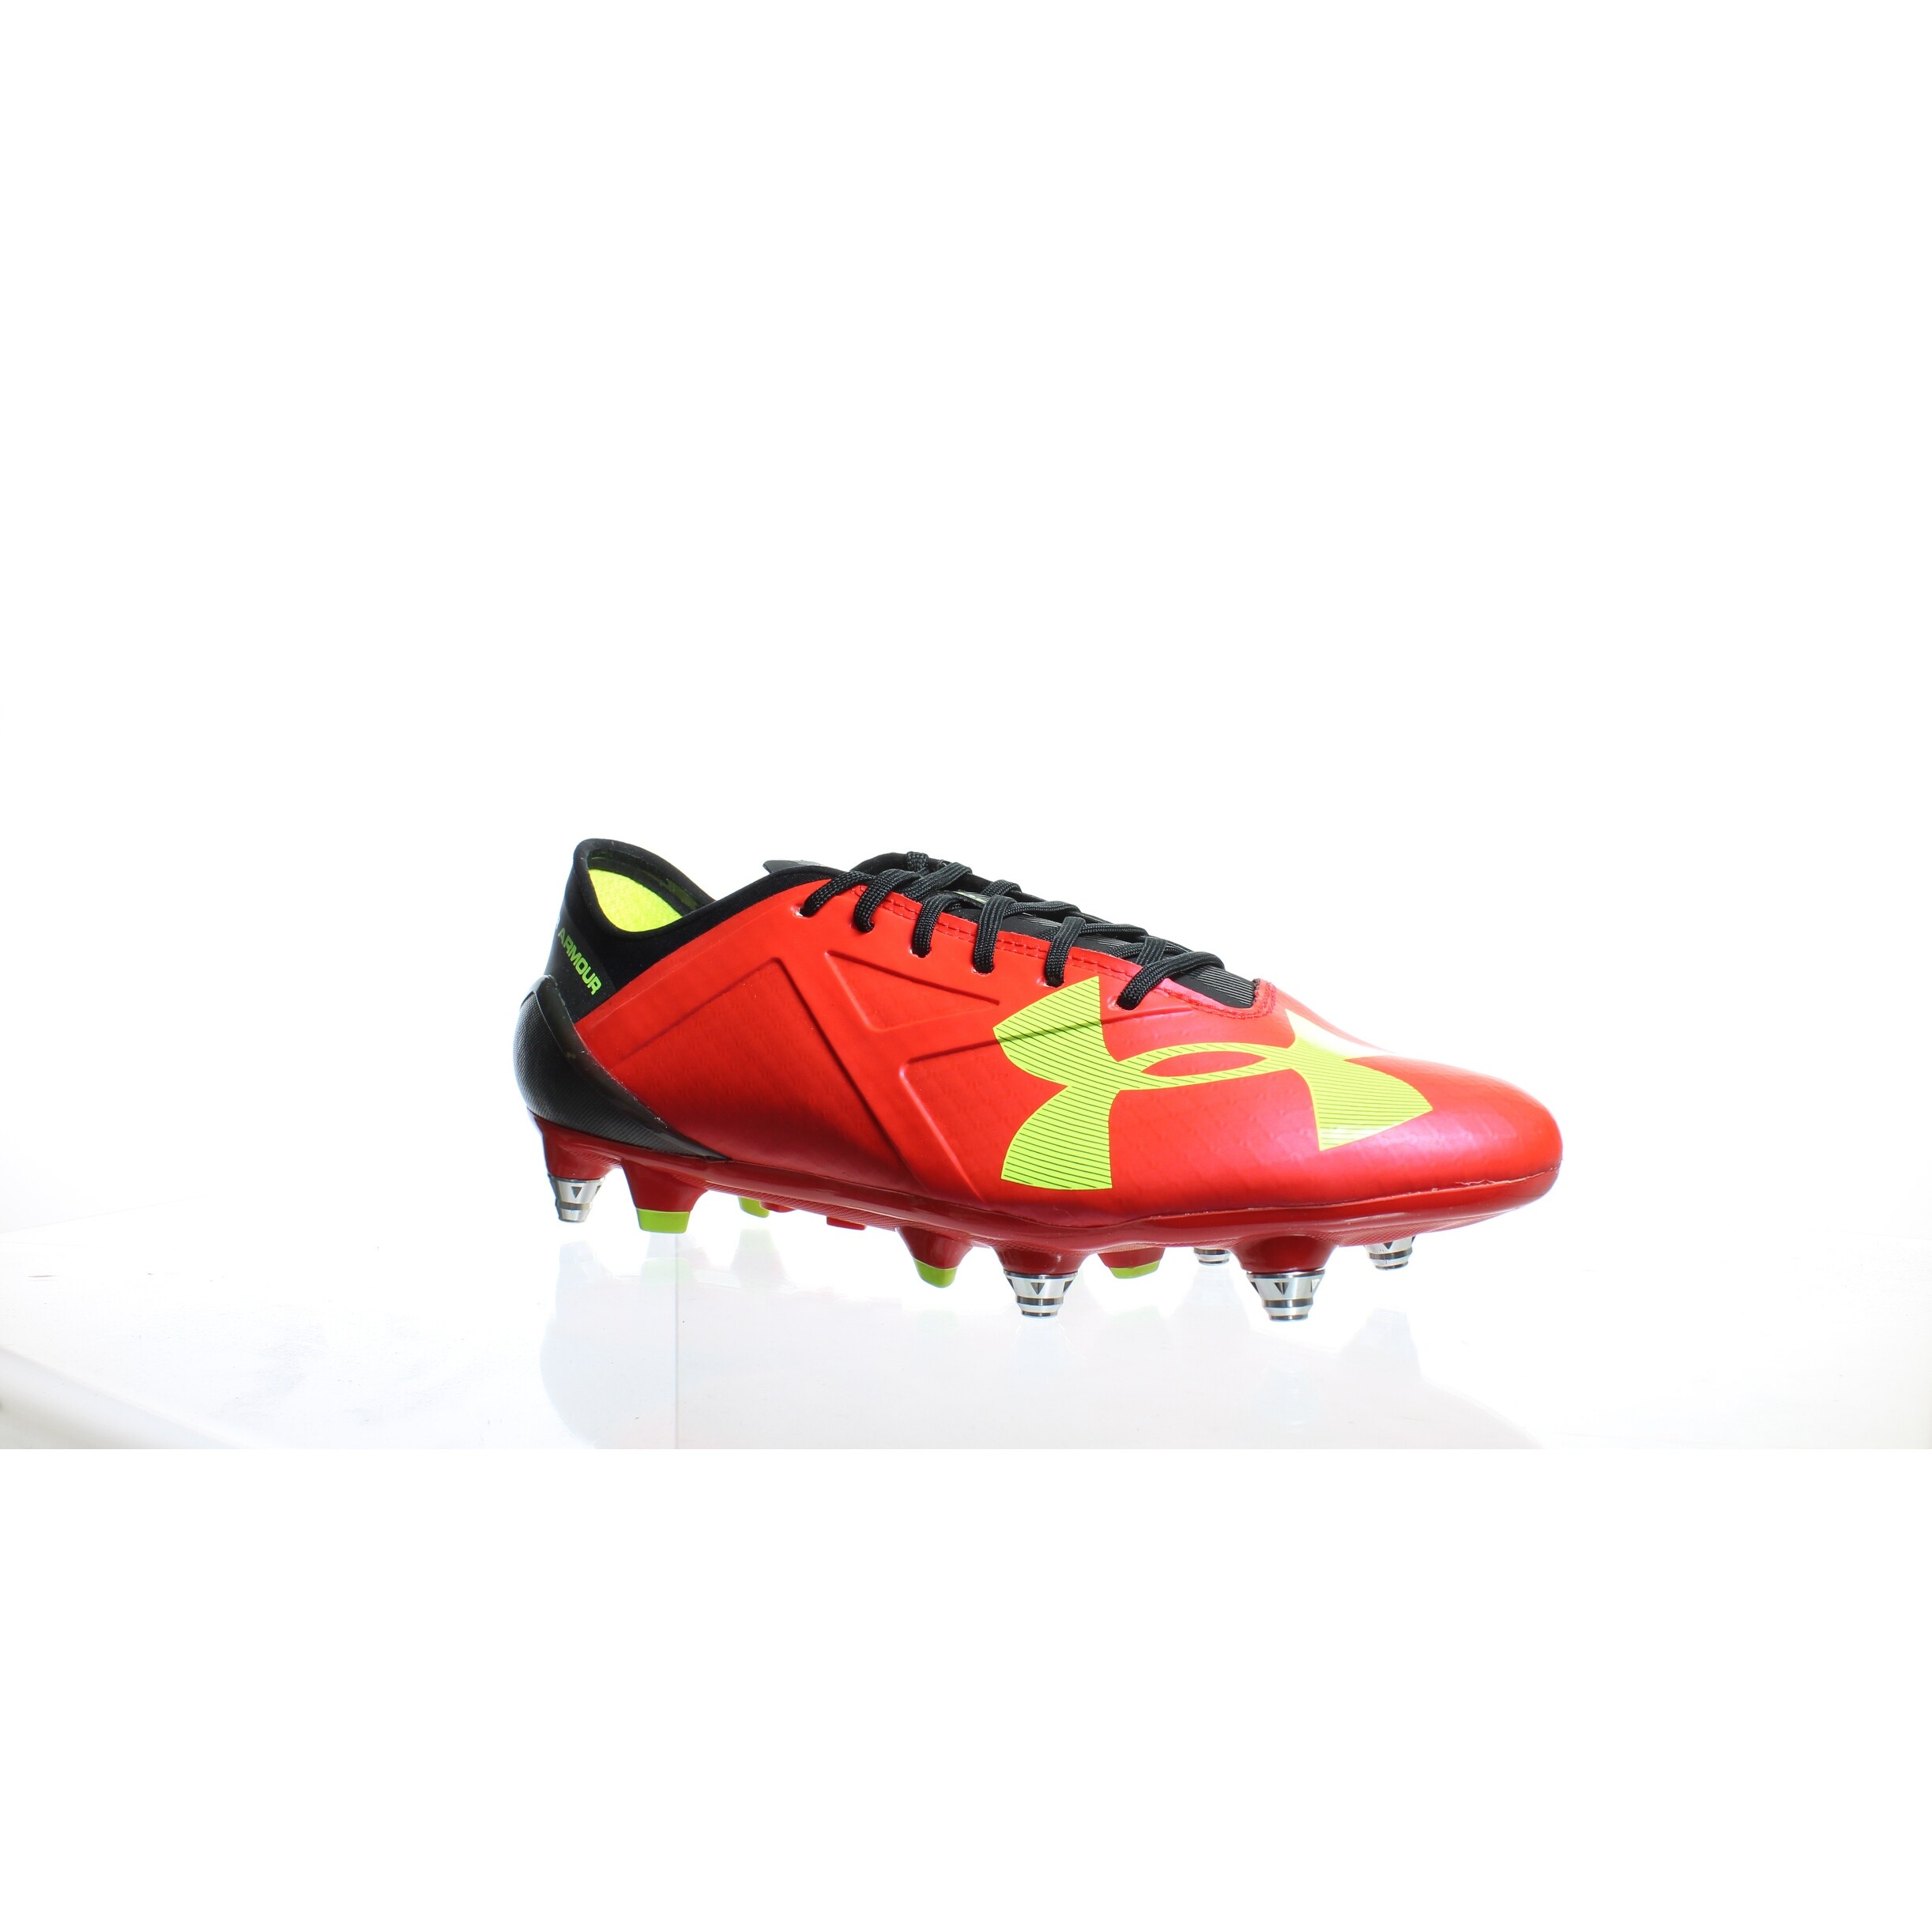 size 9 mens soccer cleats